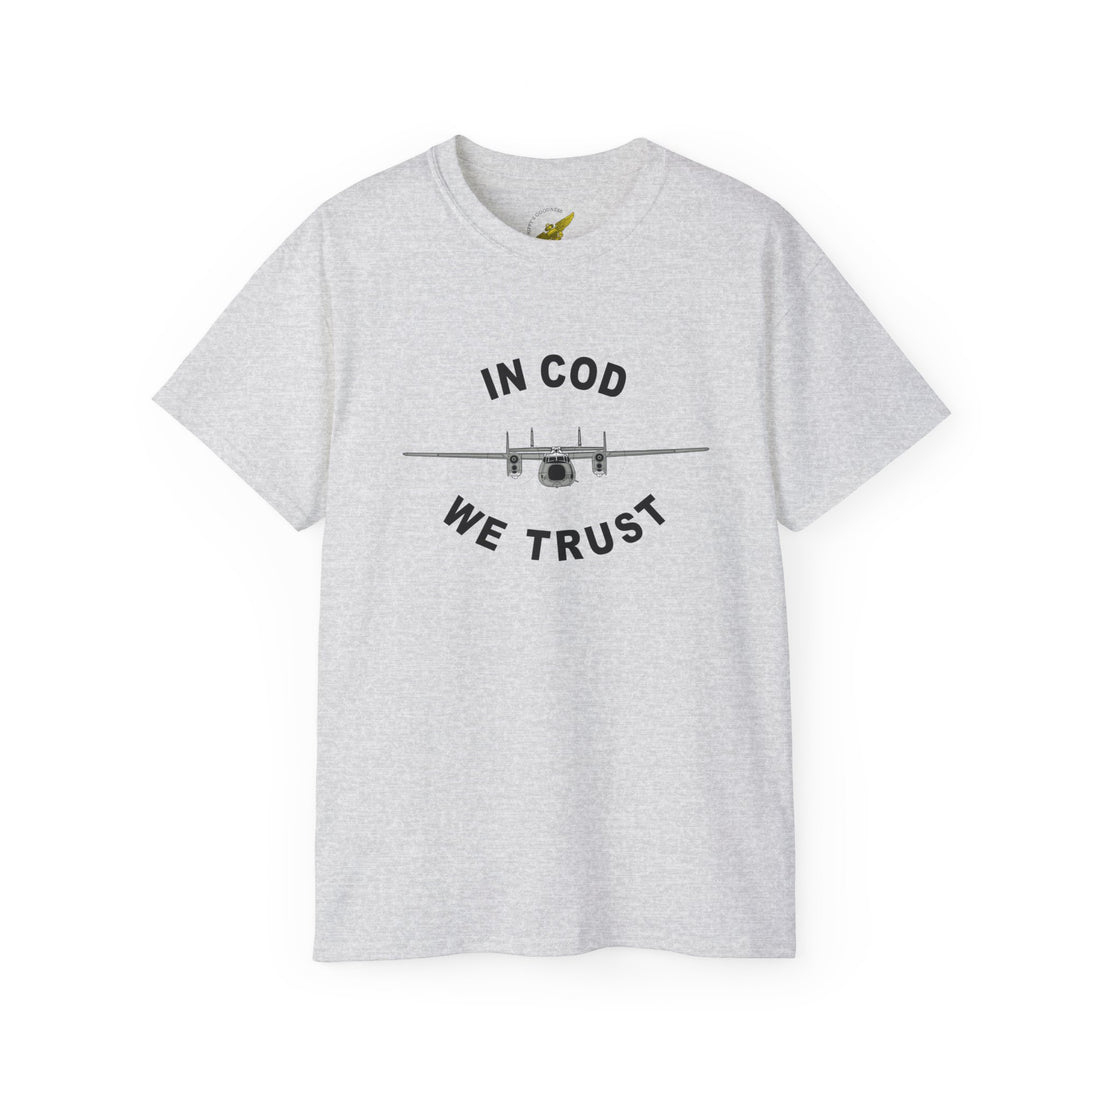 C-2 "Greyhound" IN COD WE TRUST Tee, Navy Carrier Onboard Delivery Aircraft